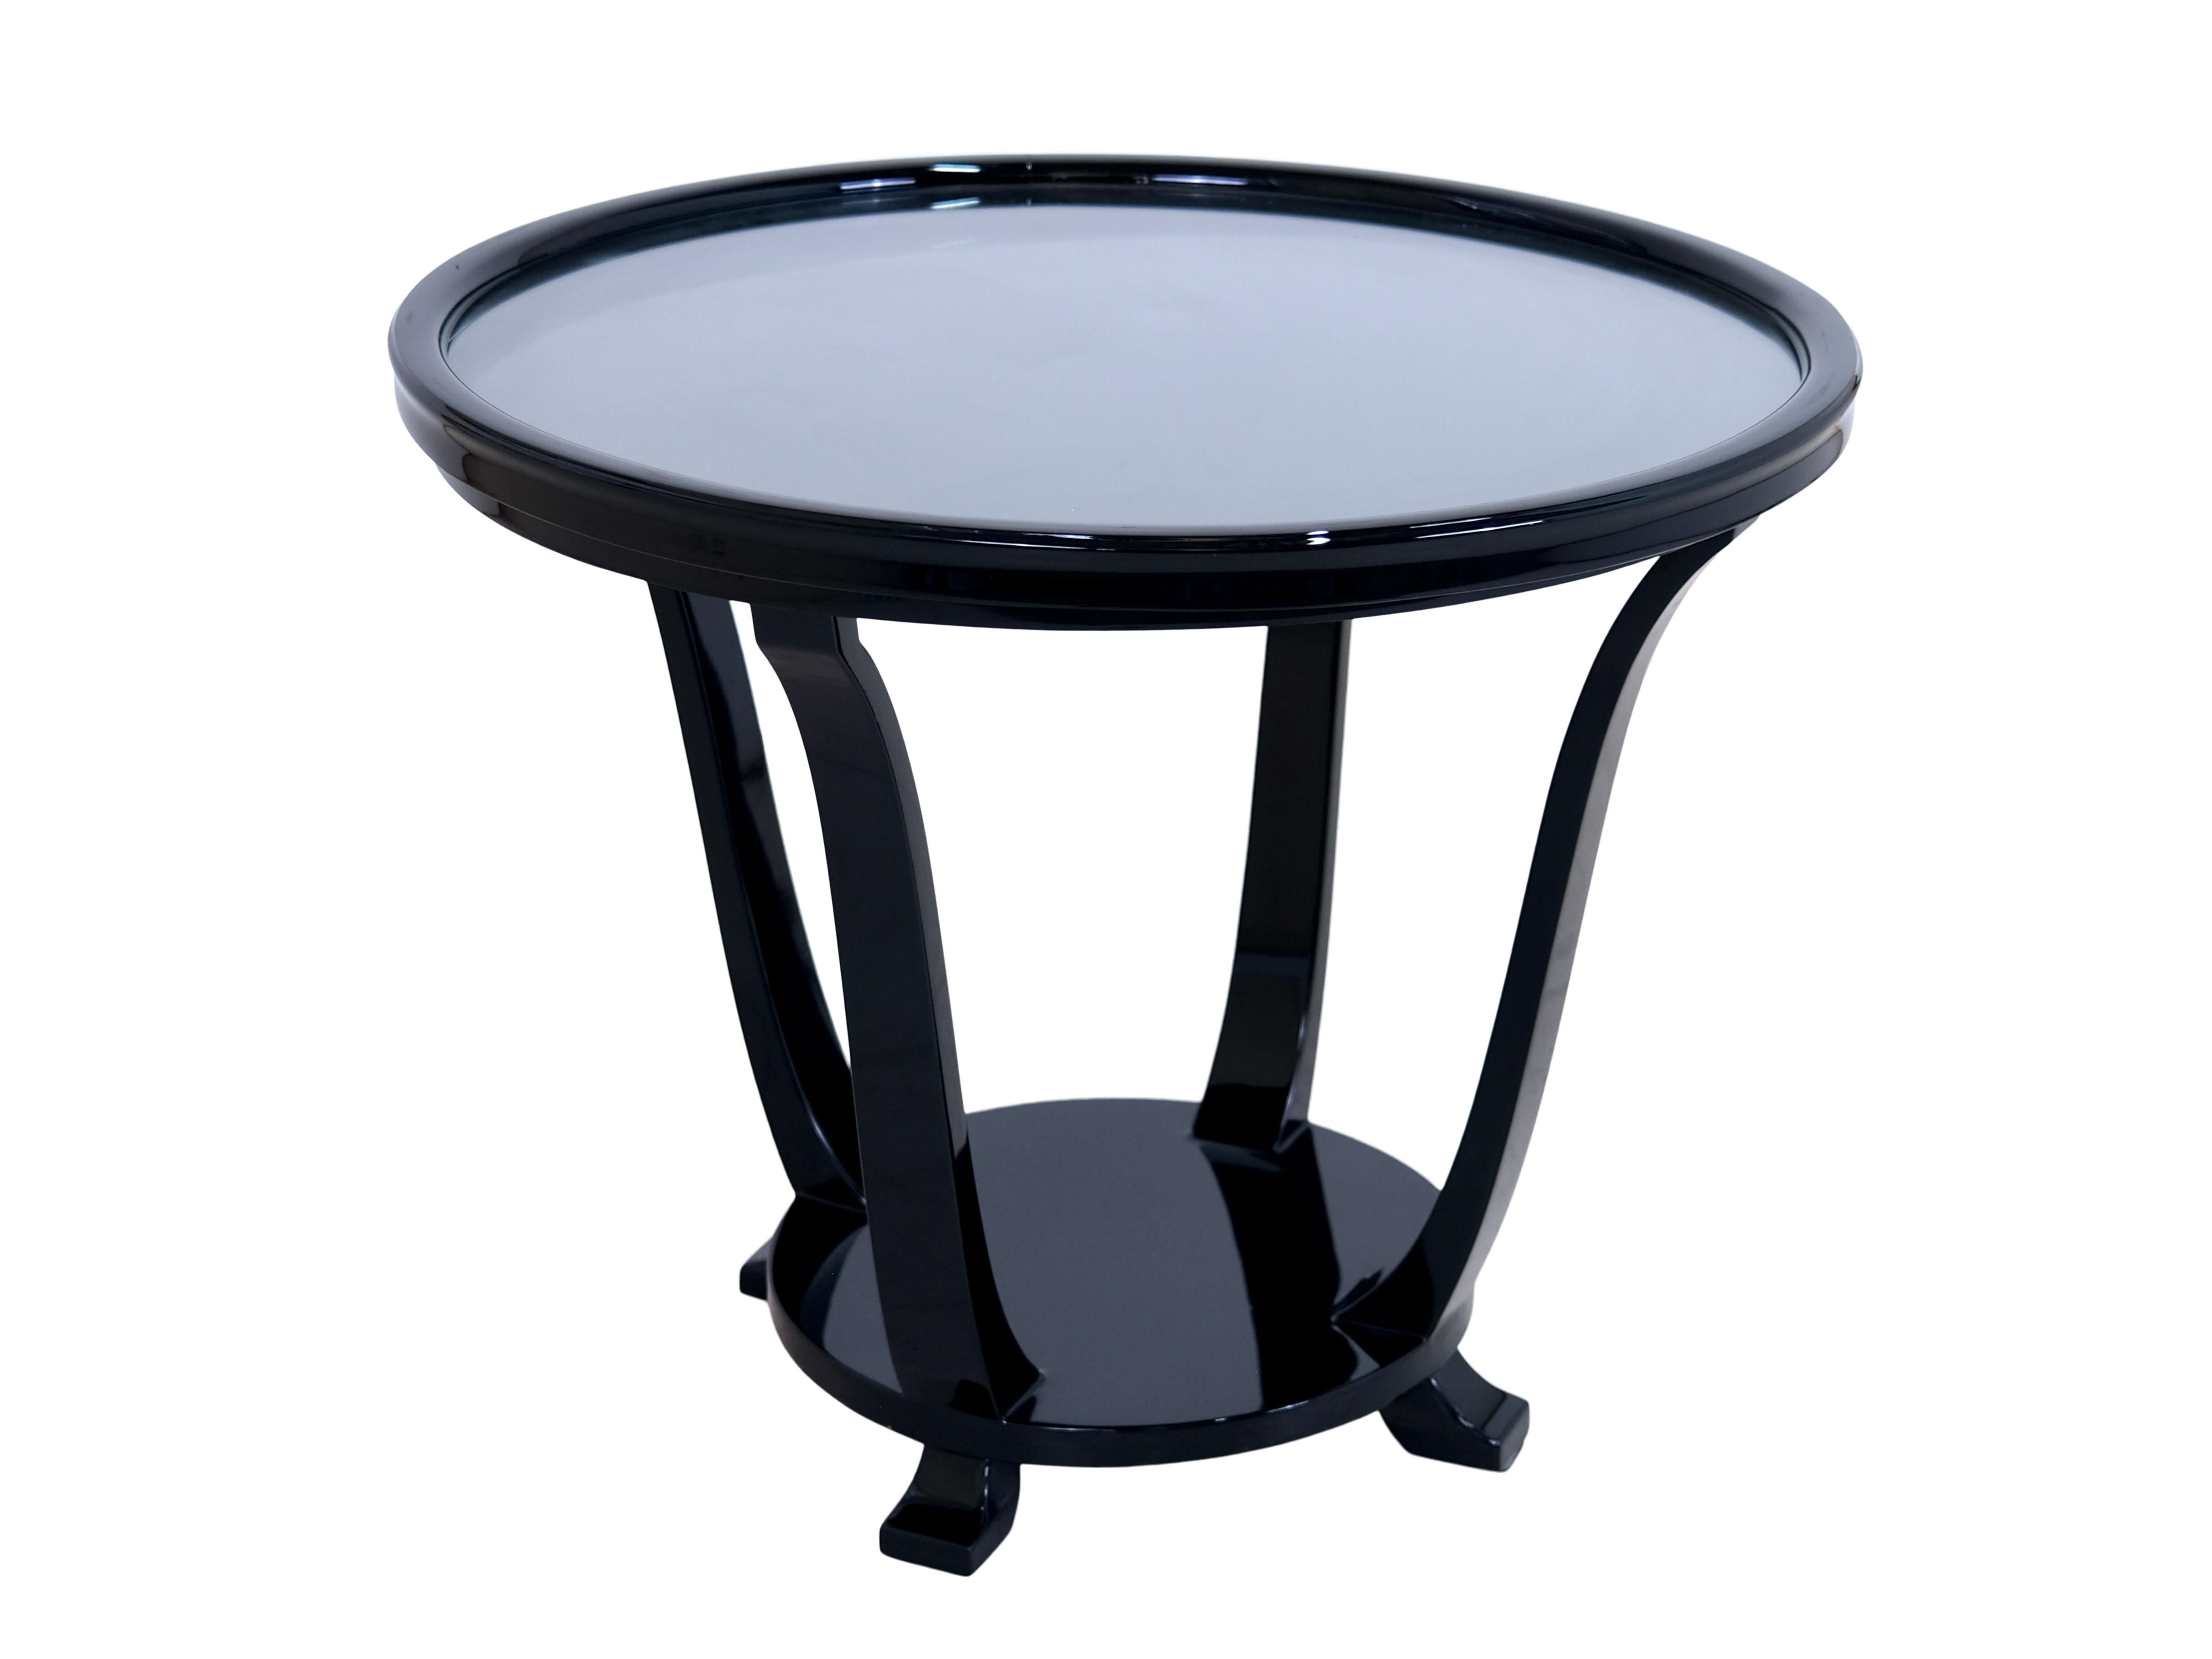 Blackened 1930s French Black Piano Lacquer Art Deco Side Table with Removable Glass Tray For Sale